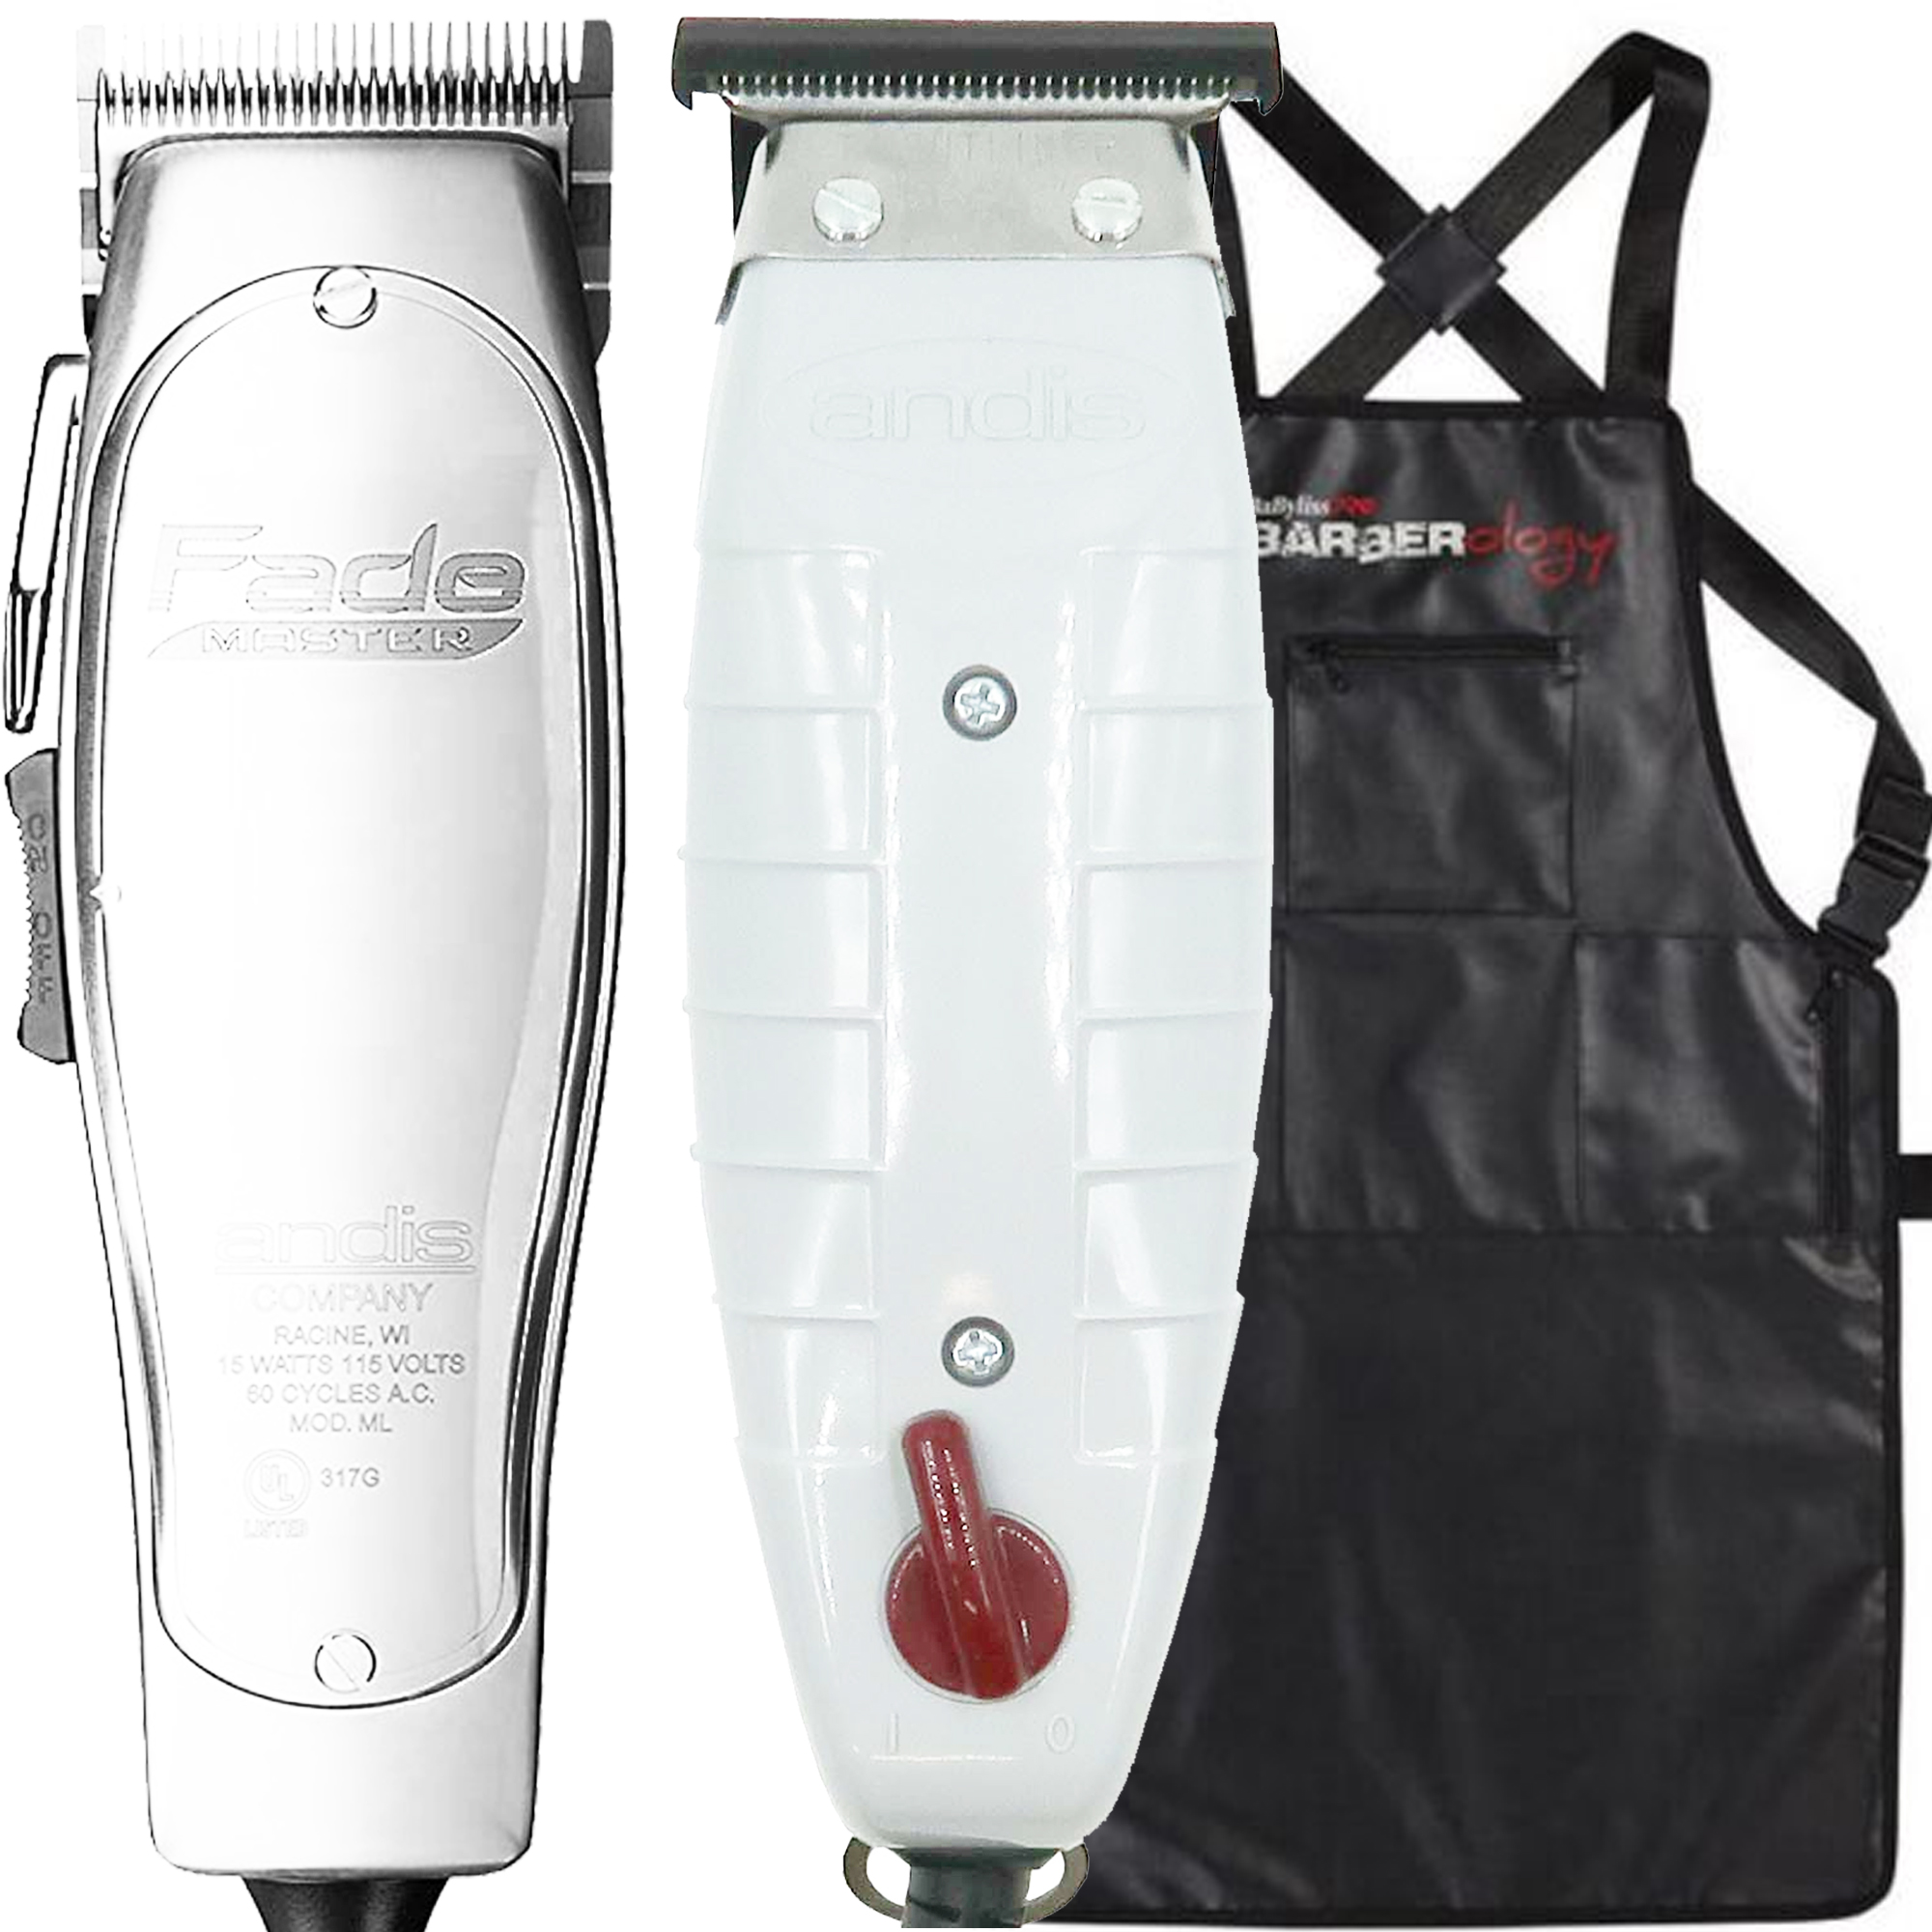 Andis 01690 Professional Fade Master Hair Clipper Silver + Andis 04710 T-Outliner Beard/Hair Trimmer & Apron